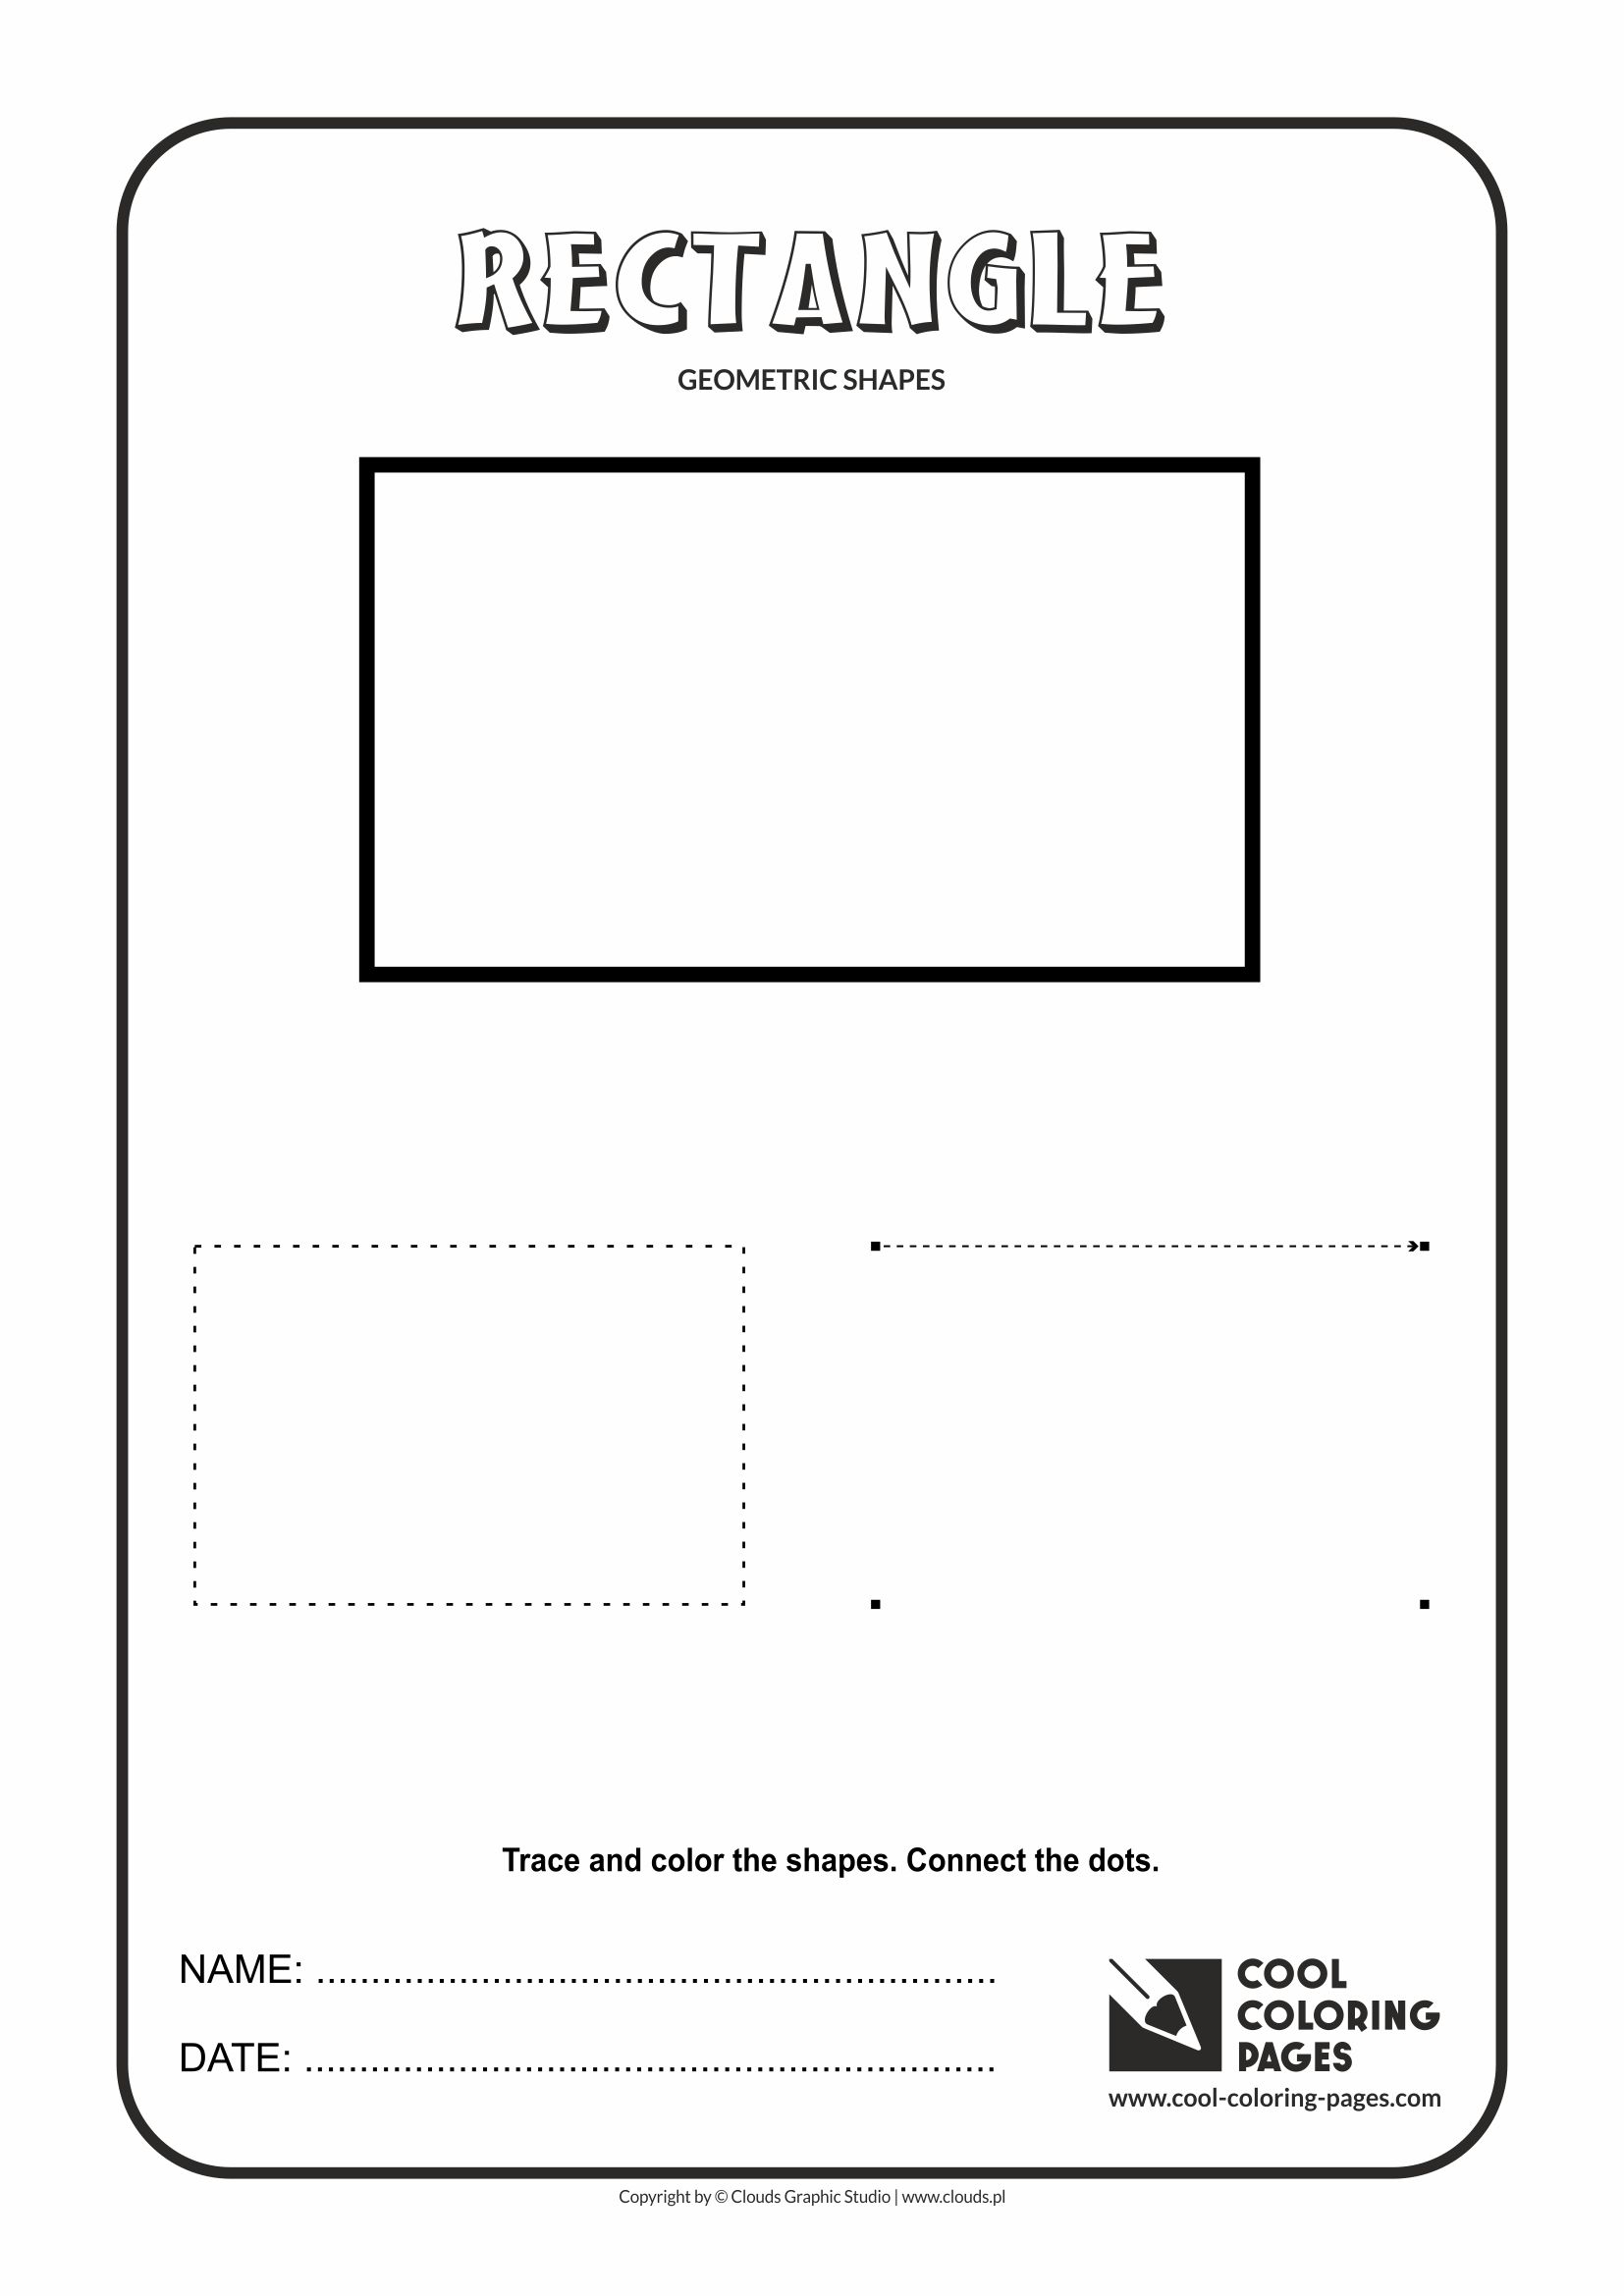 Cool Coloring Pages - Geometric shapes / Rectangle